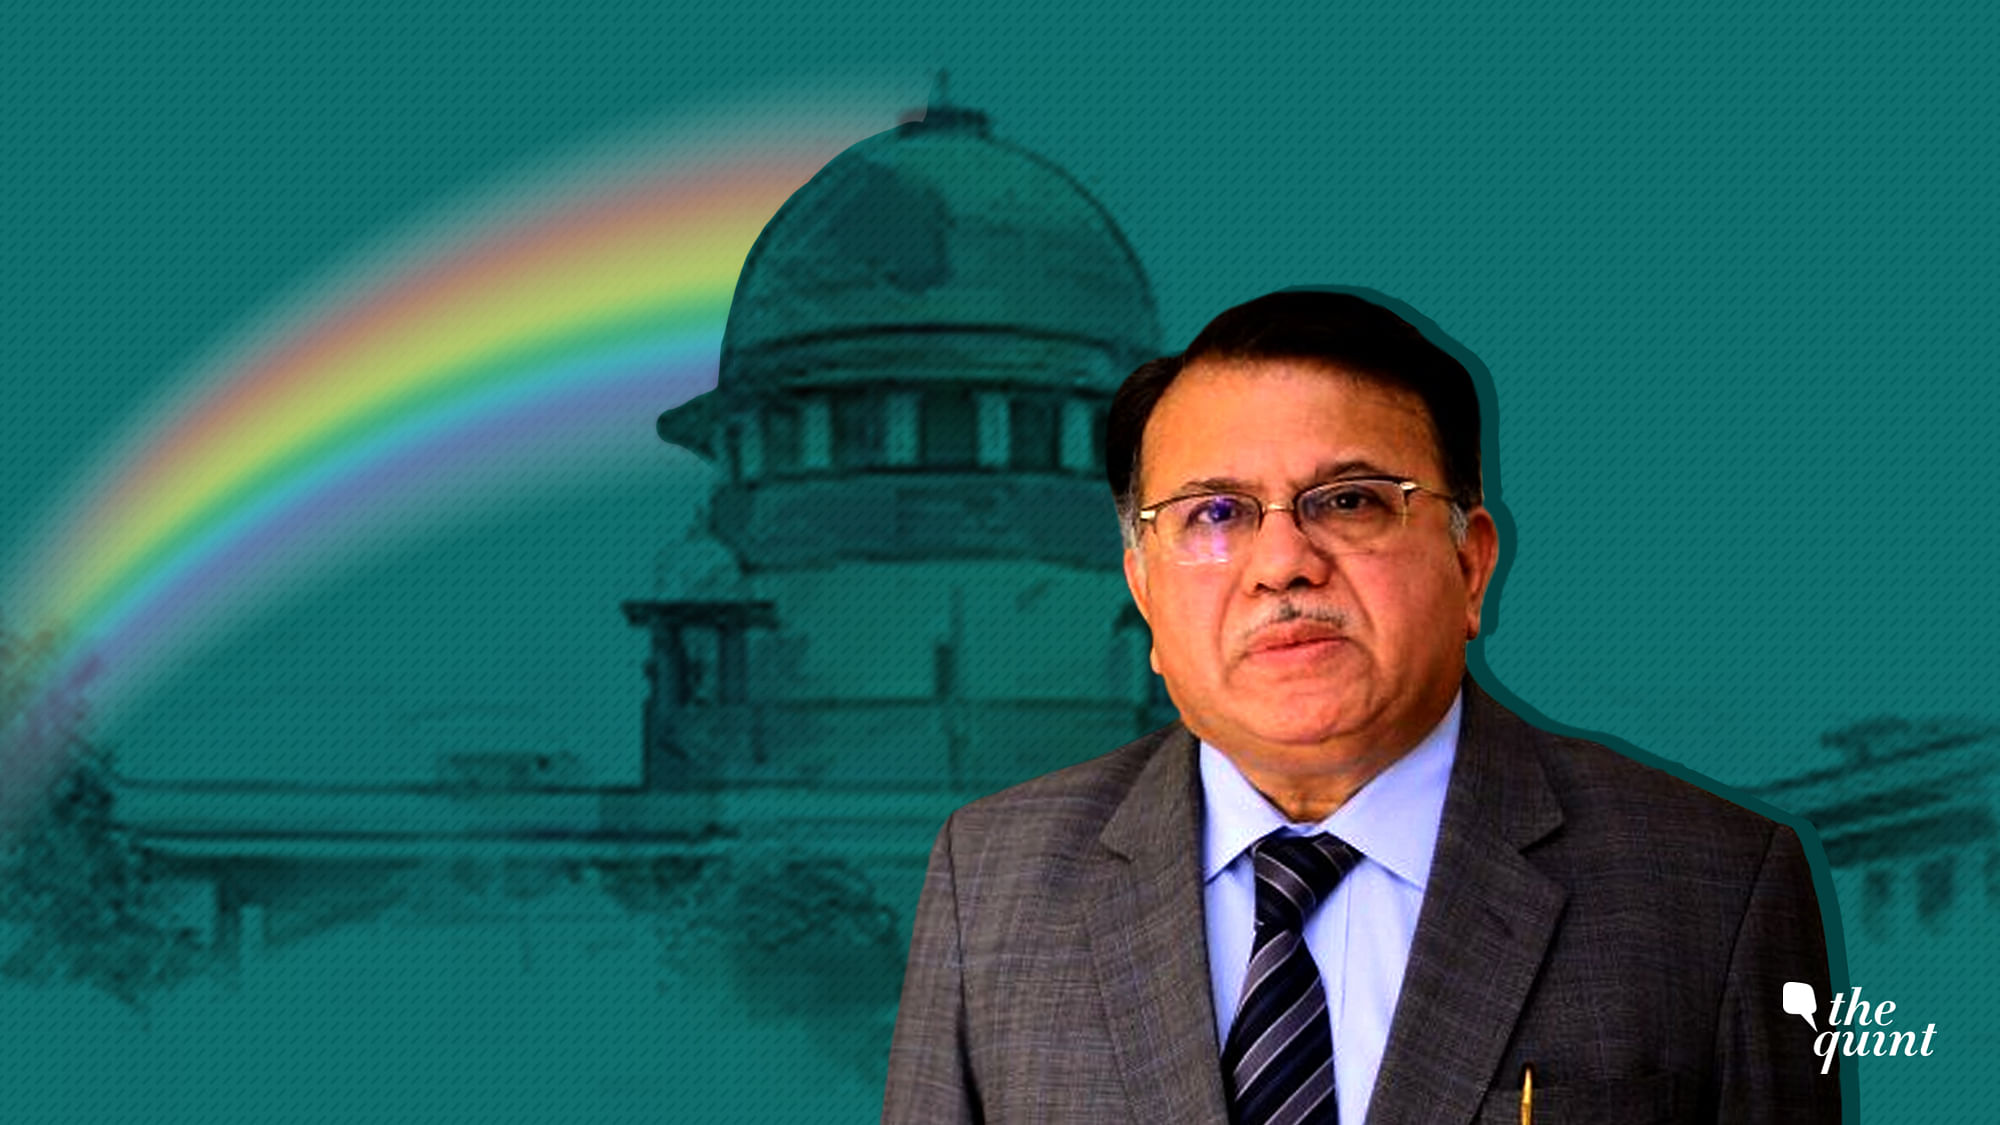 Justice AP Shah, the Delhi HC judge who first gave dignity to the LGBTQ community.